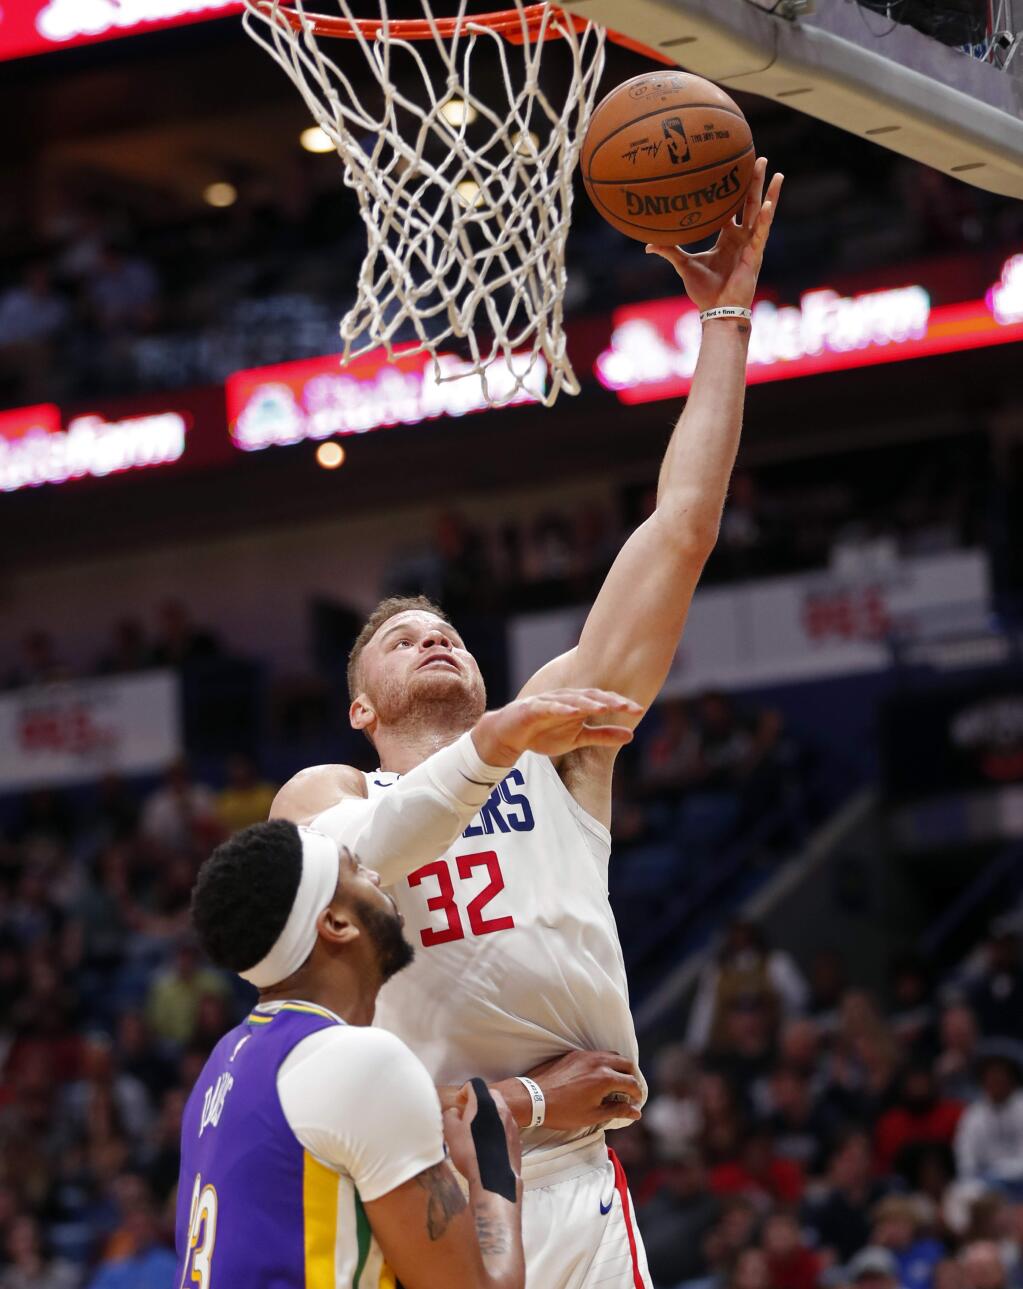 Los Angeles Clippers forward Blake Griffin (32) goes to the basket over New Orleans Pelicans forward Anthony Davis (23) in the first half of an NBA basketball game in New Orleans, Sunday, Jan. 28, 2018. (AP Photo/Gerald Herbert)